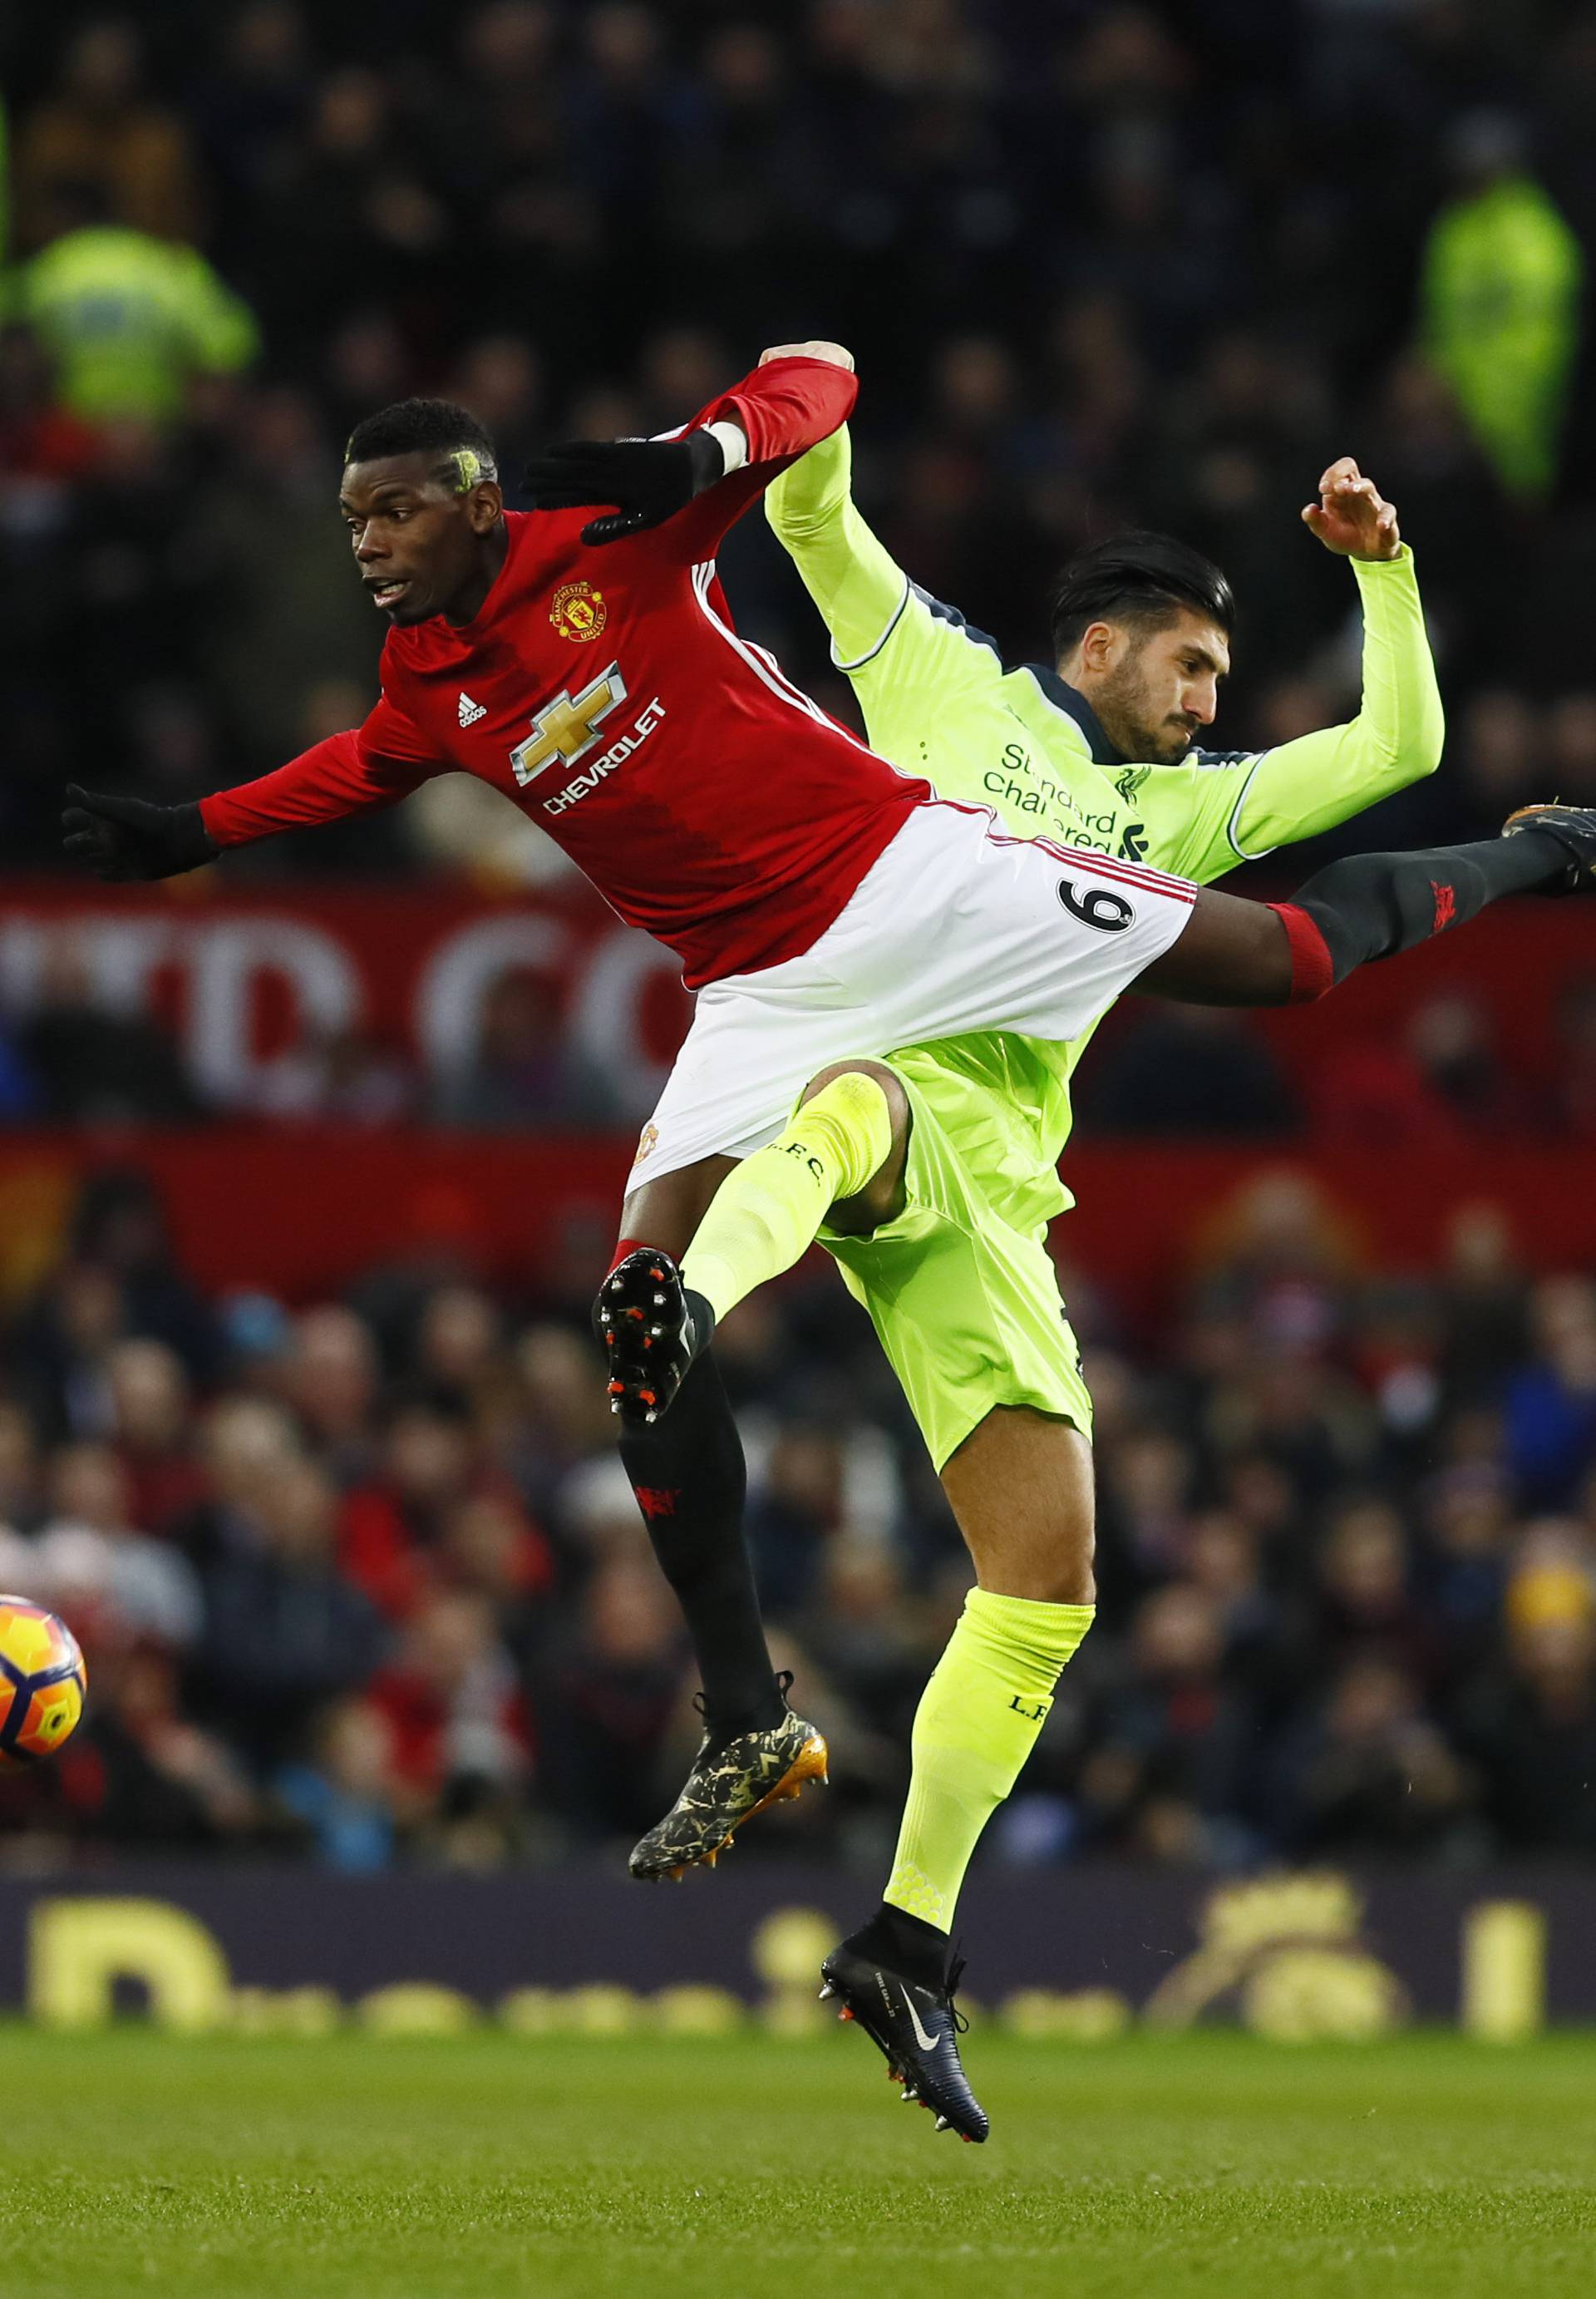 Manchester United's Paul Pogba in action with Liverpool's Emre Can